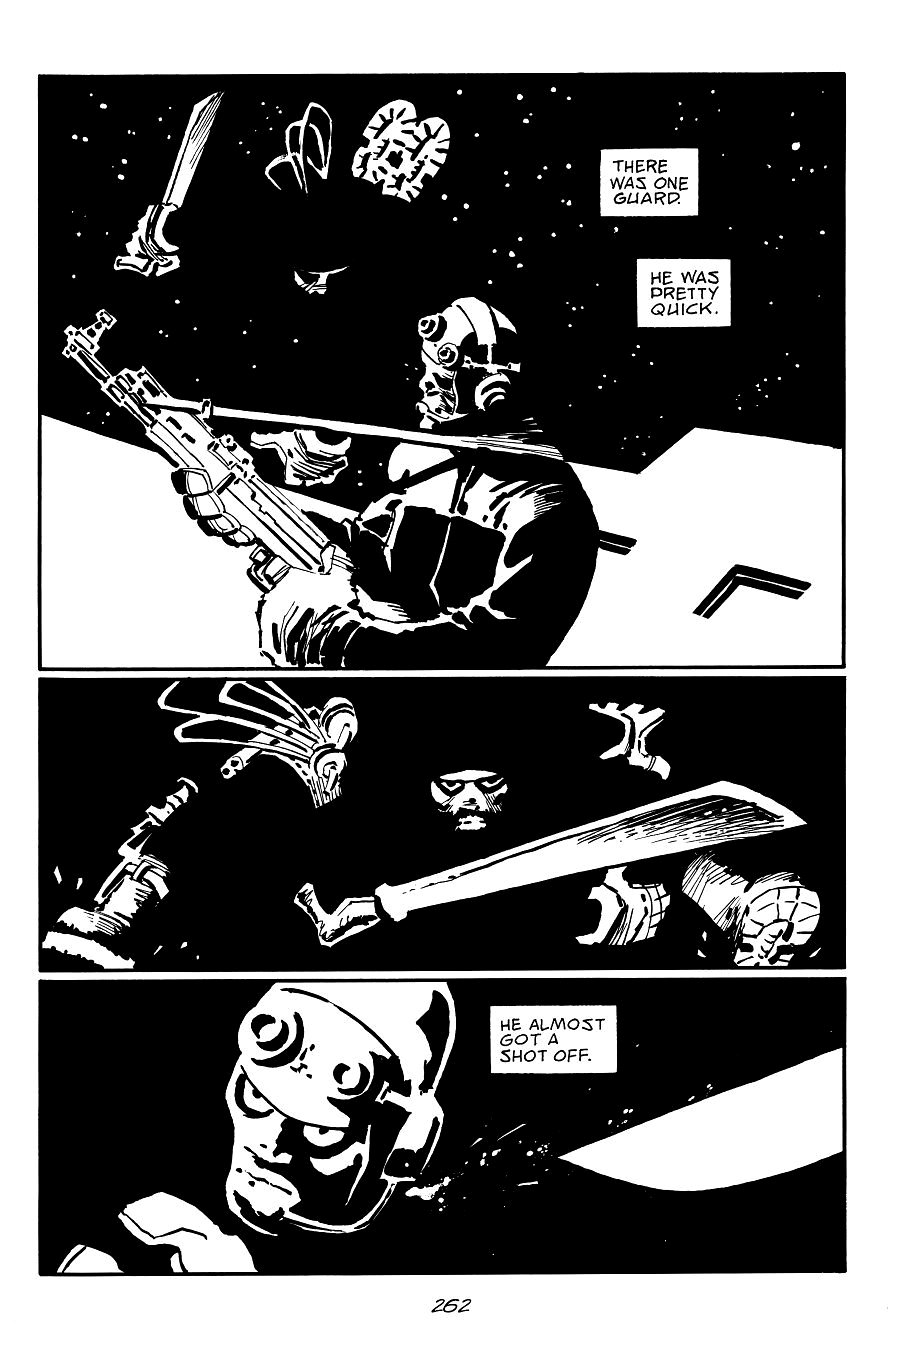 page 262 of sin city 7 hell and back